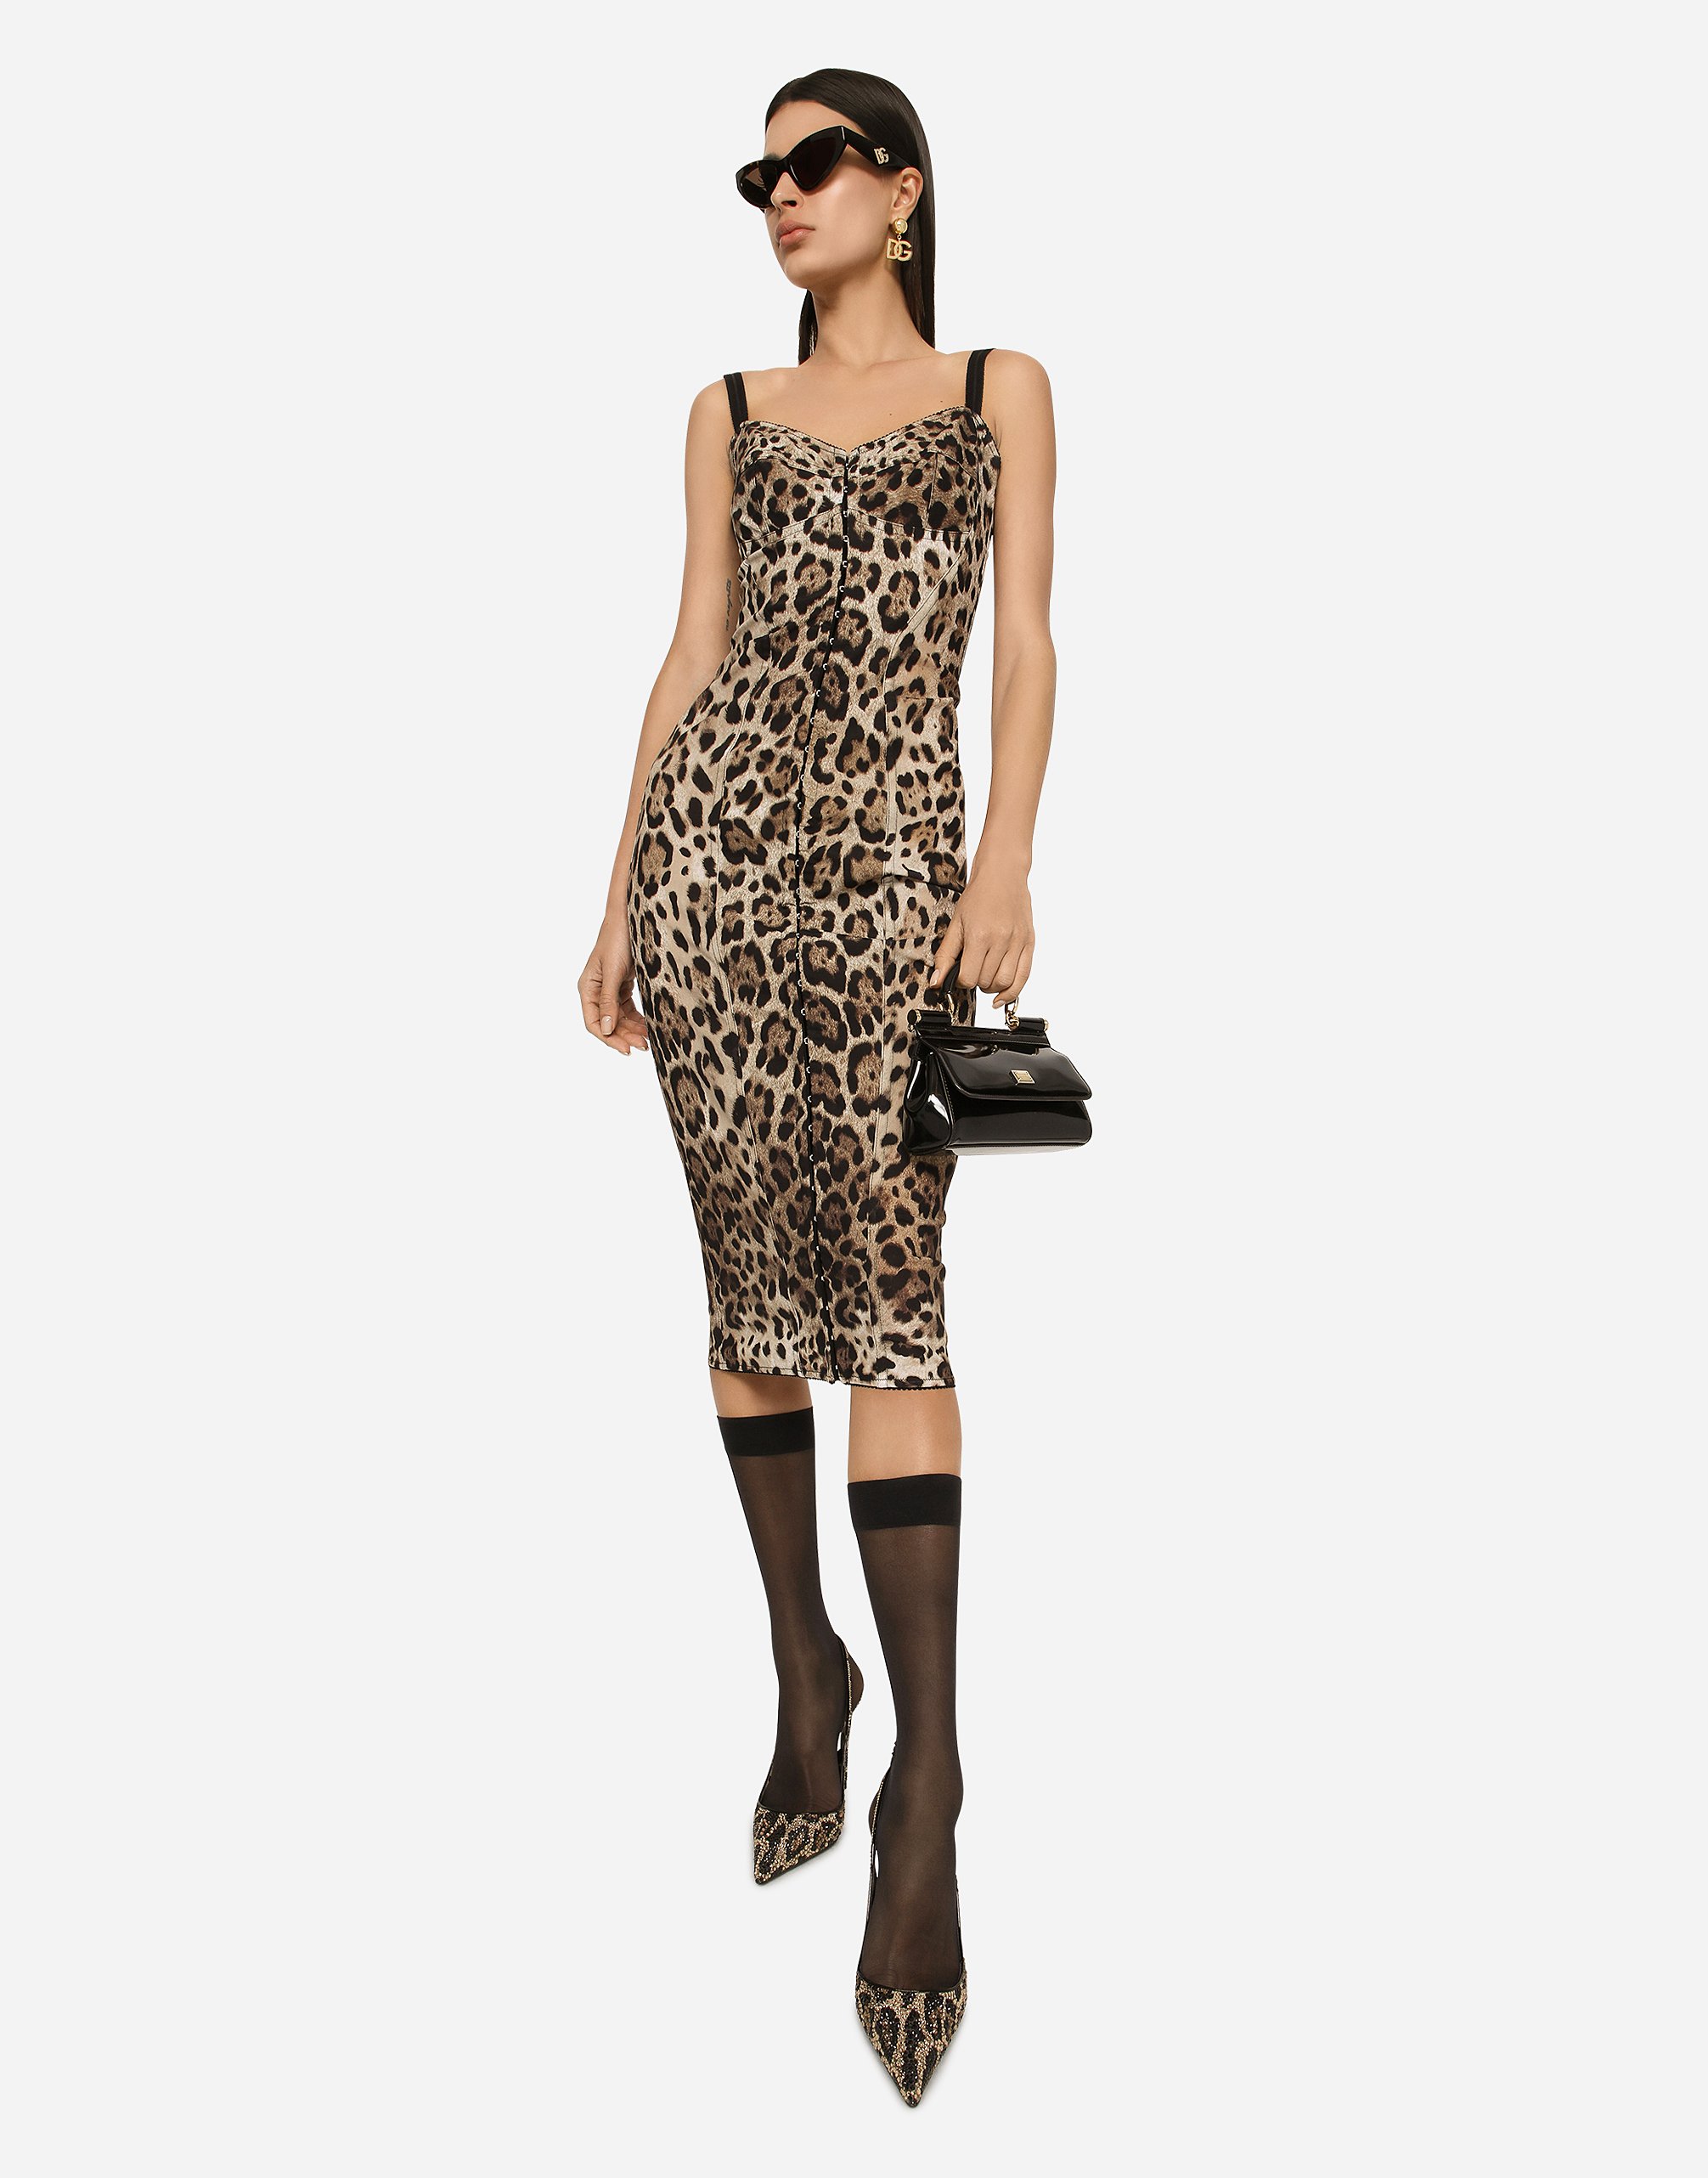 Marquisette calf-length dress with leopard print